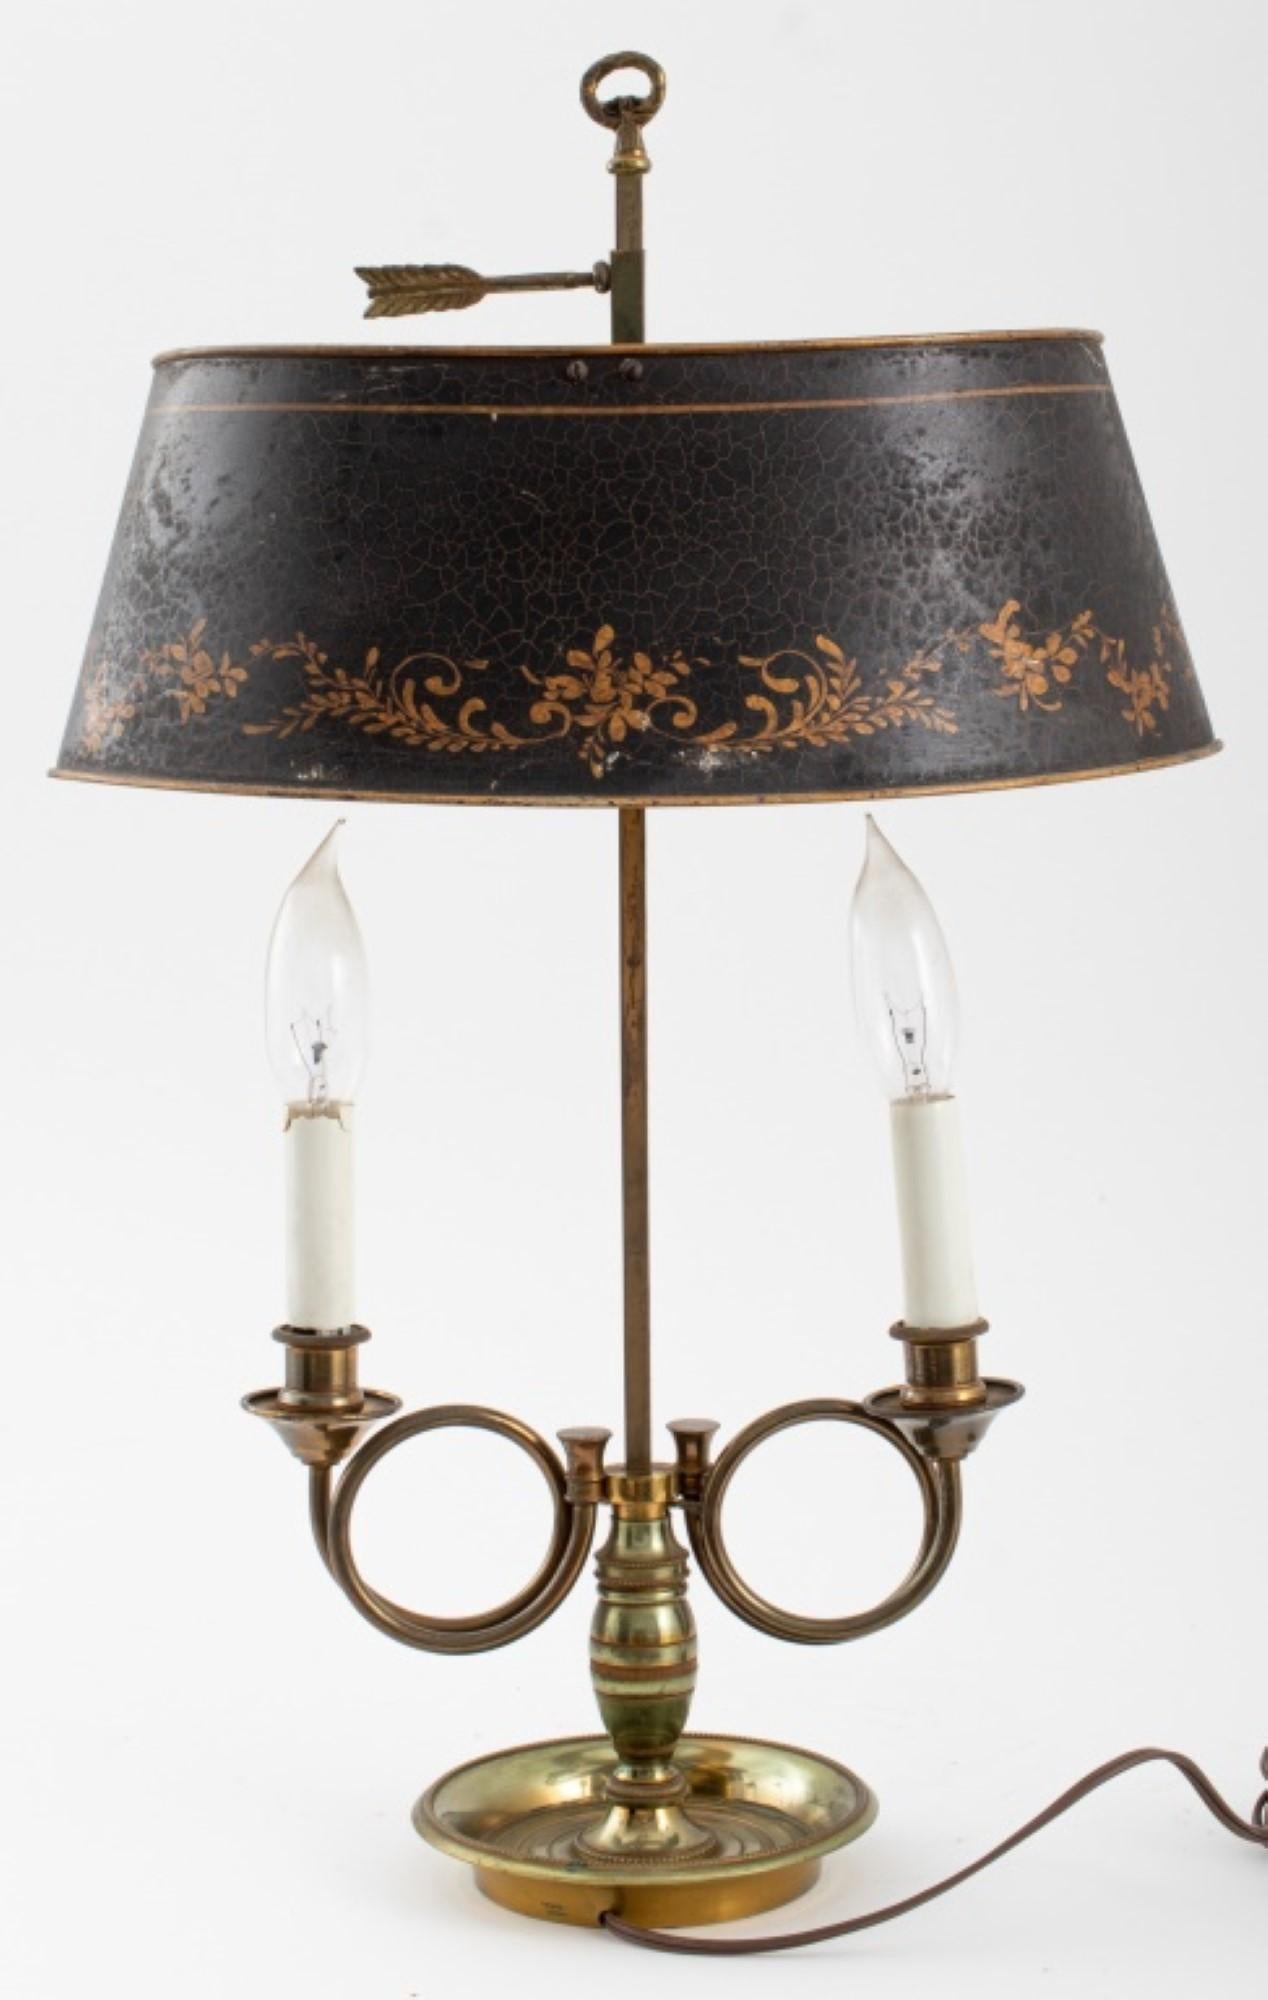 Two-Light Bouillotte Brass Lamp with French Horn Style Arms and Painted Tole Shade

This elegant lamp is crafted from polished brass and features two graceful arms that resemble French horns. The arms support a beautifully painted tole shade that